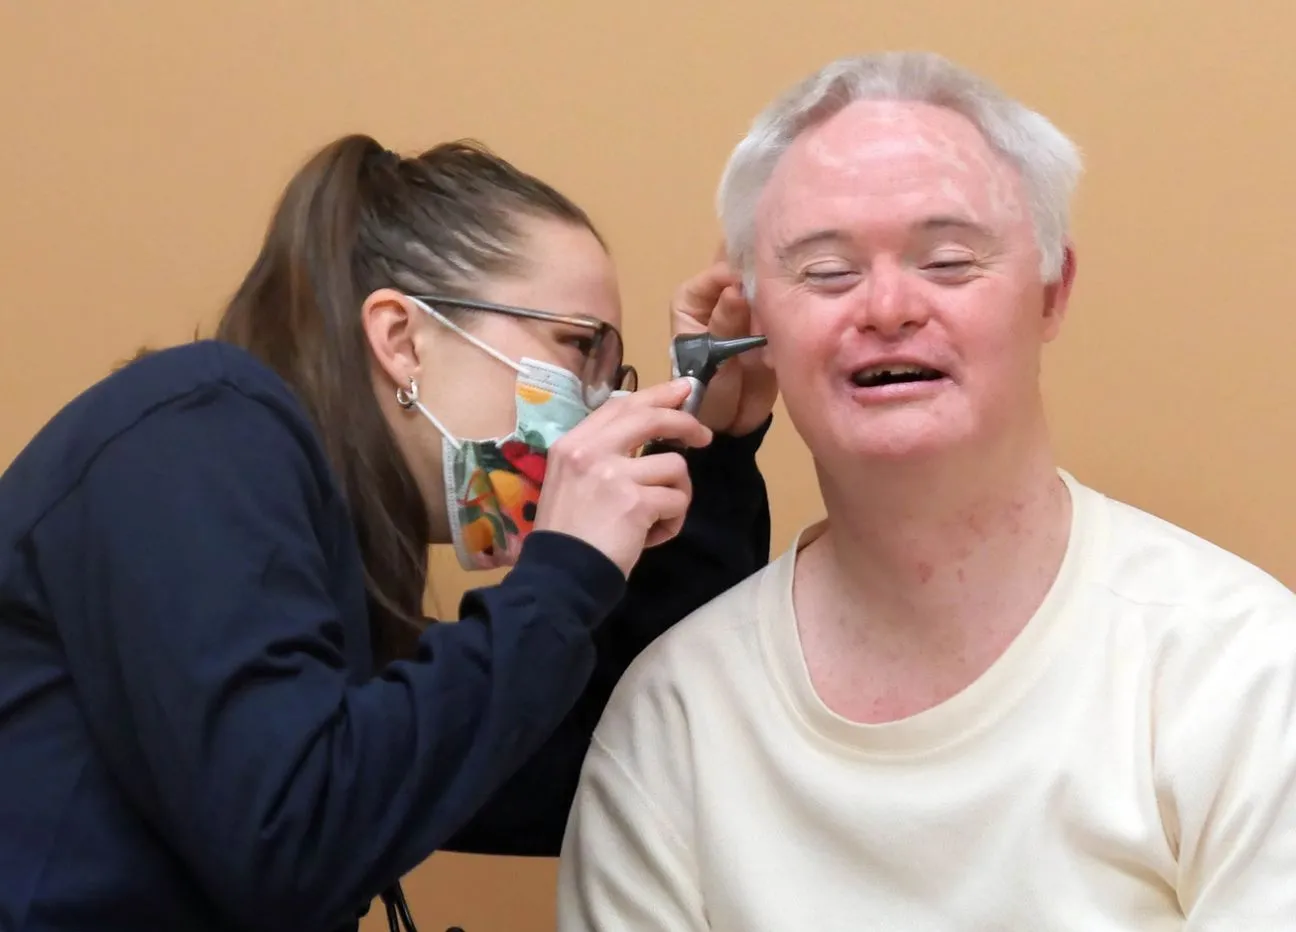 Female doctor wearing a face mask and eyeglasses checking a male patient's ear.